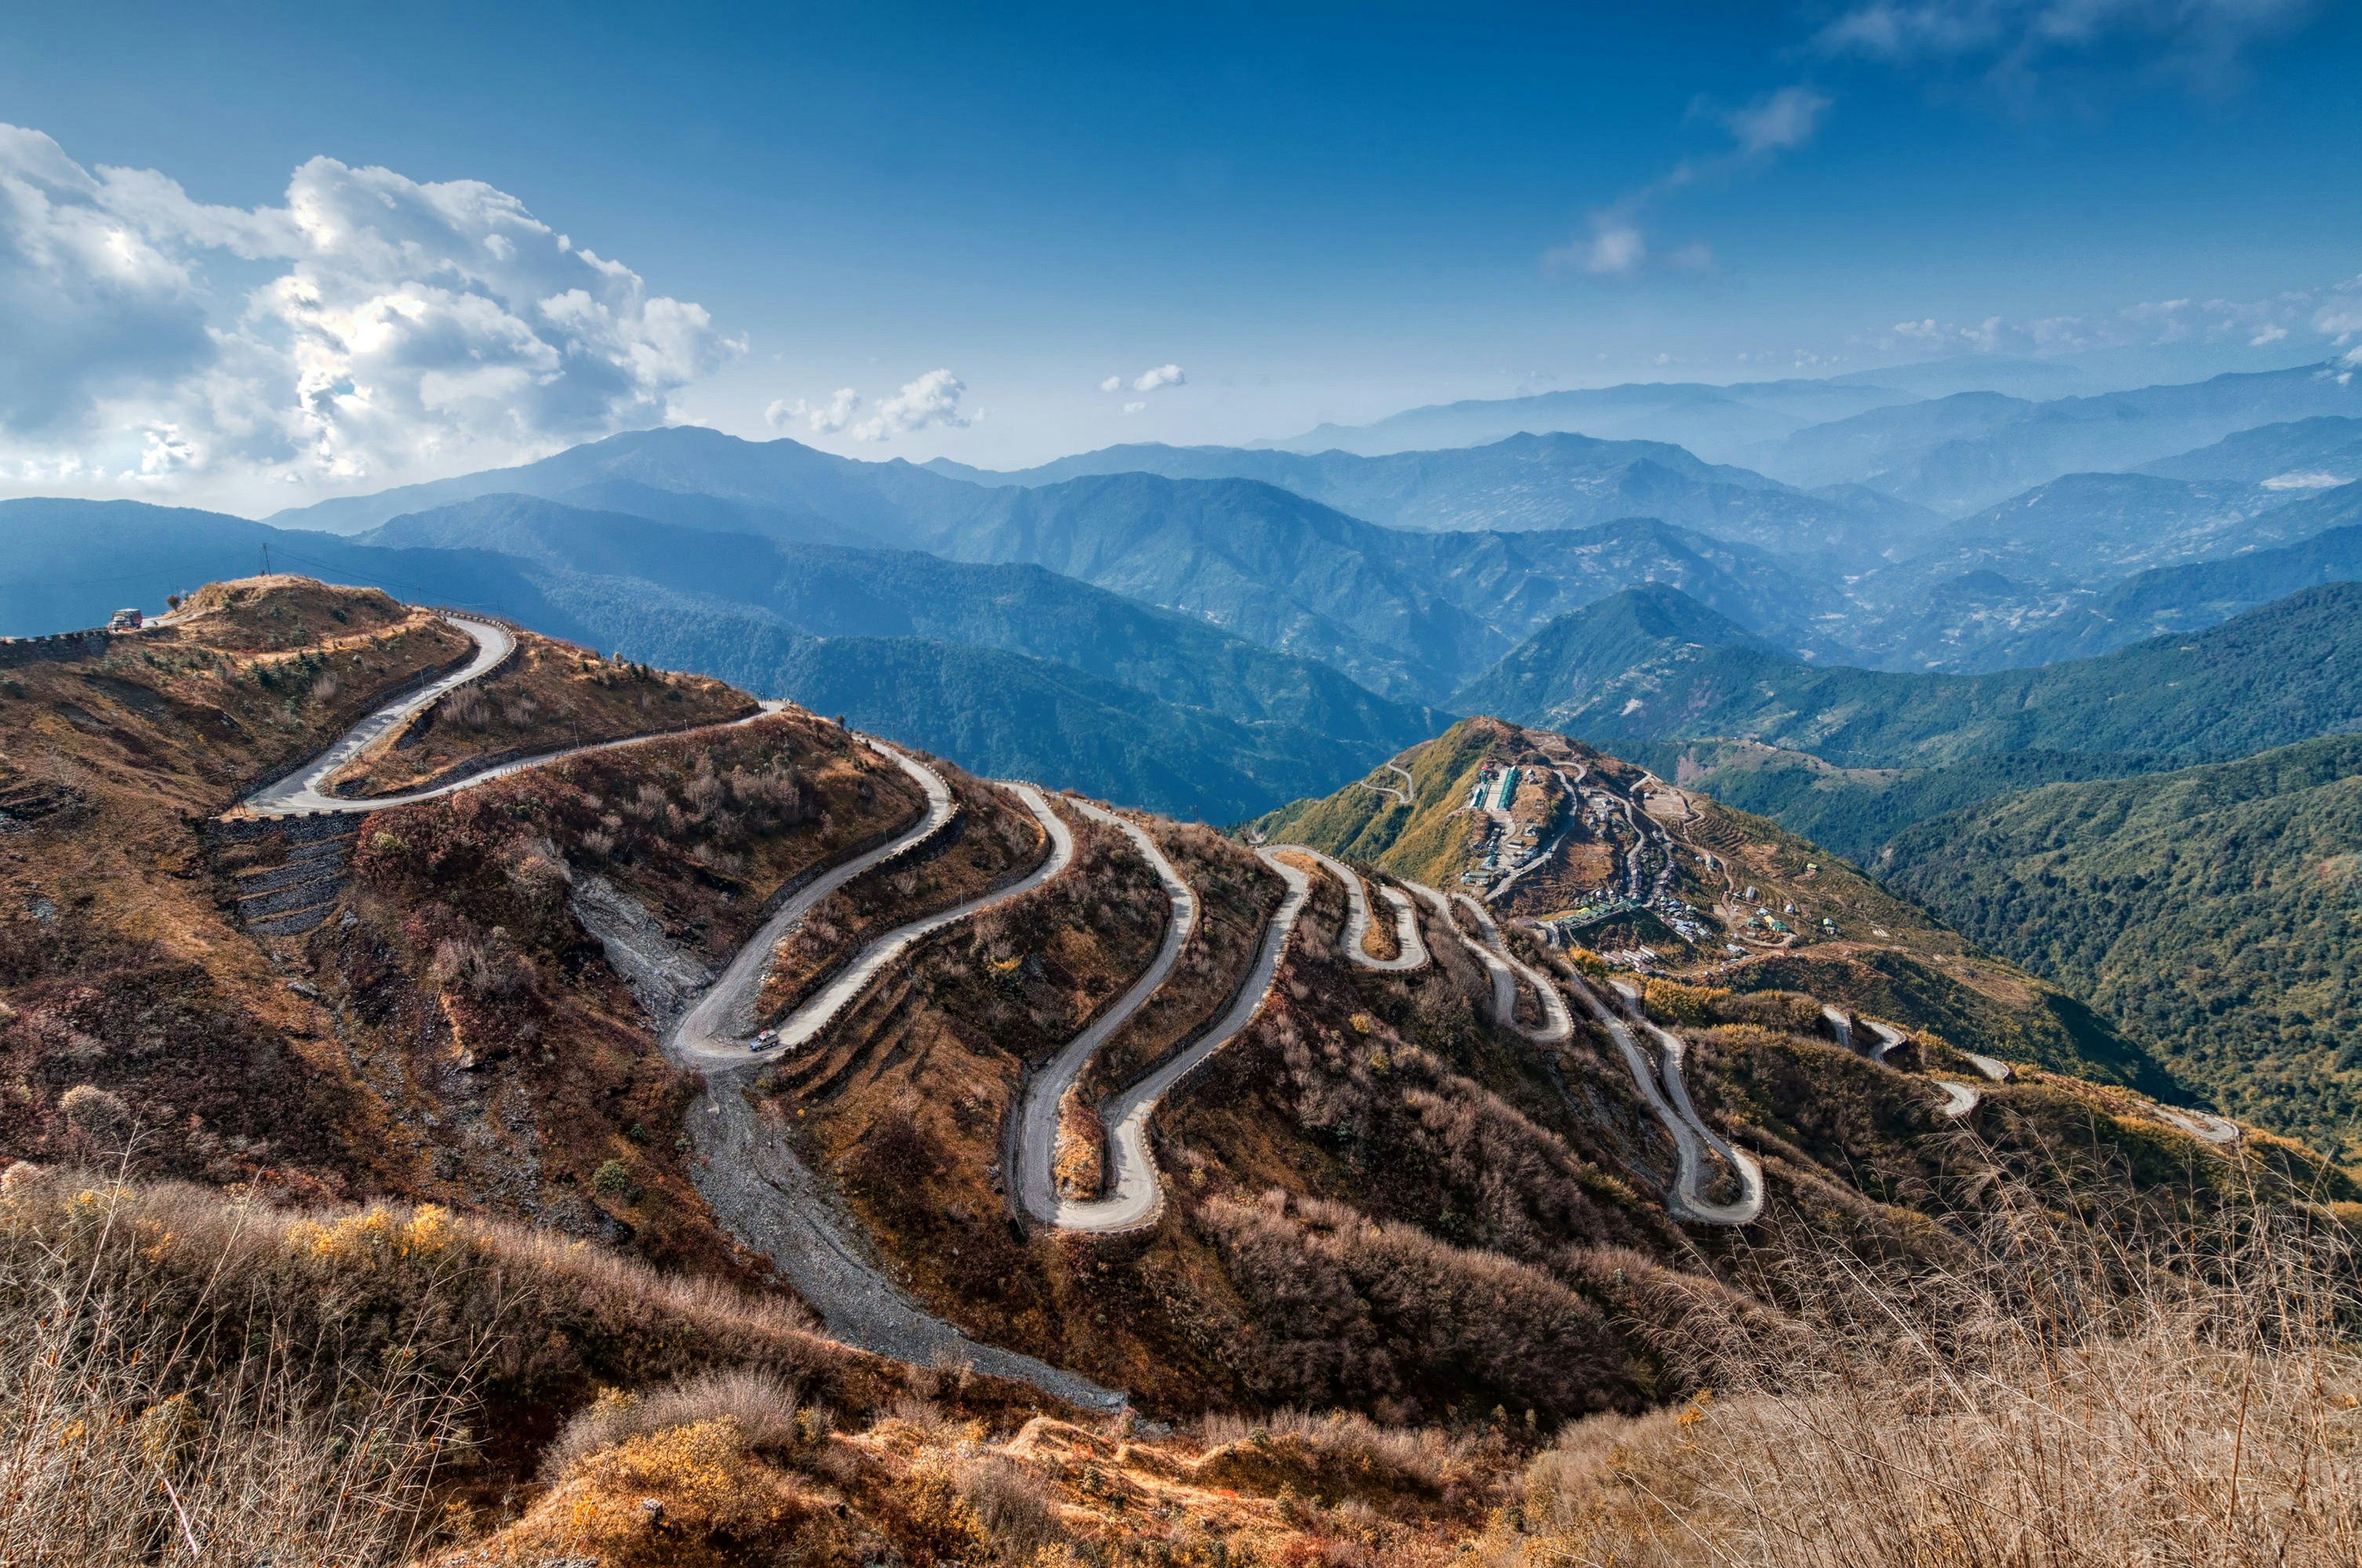 A single road winds its way up a steep mountain in Sikkim. With more mountains visible in the distance.